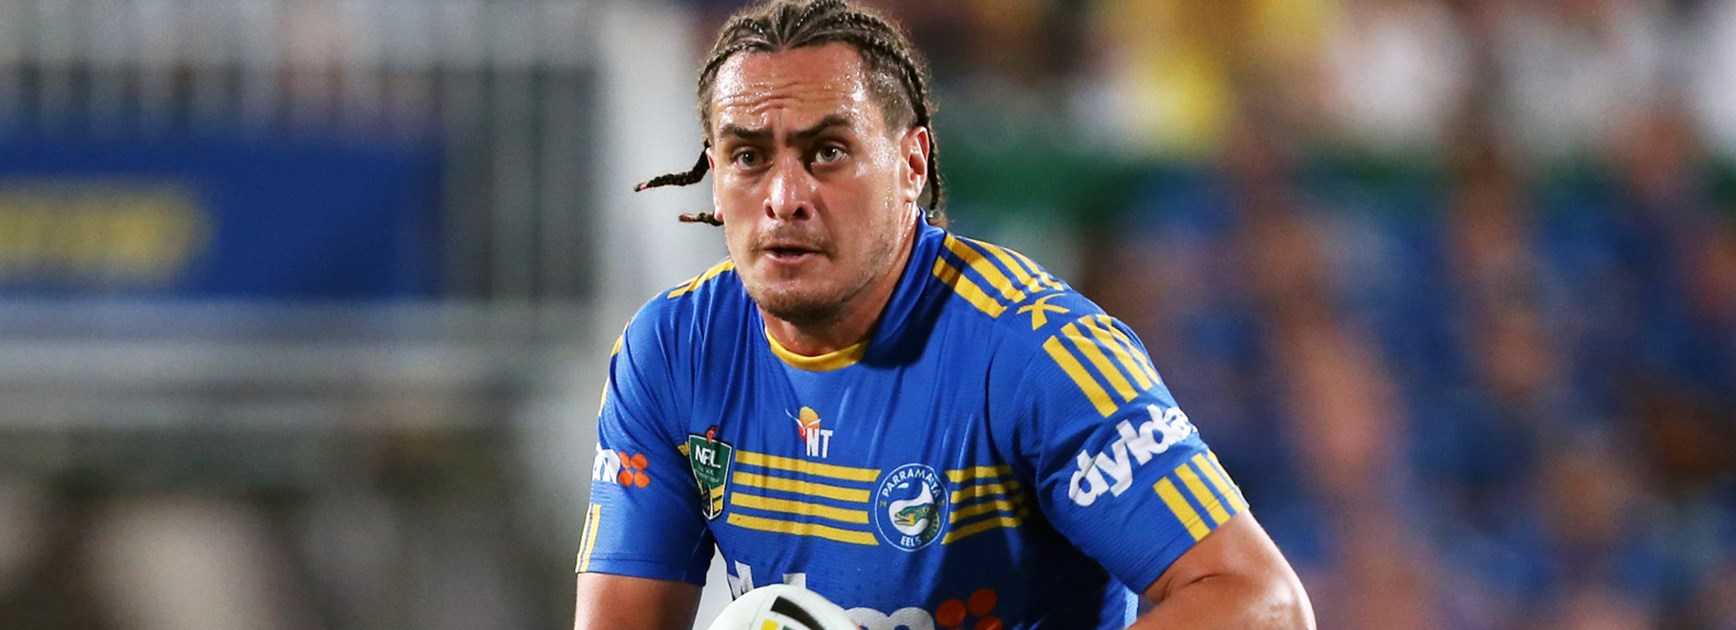 Eels centre Brad Takairangi will play in the halves alongside Corey Norman in Round 9.